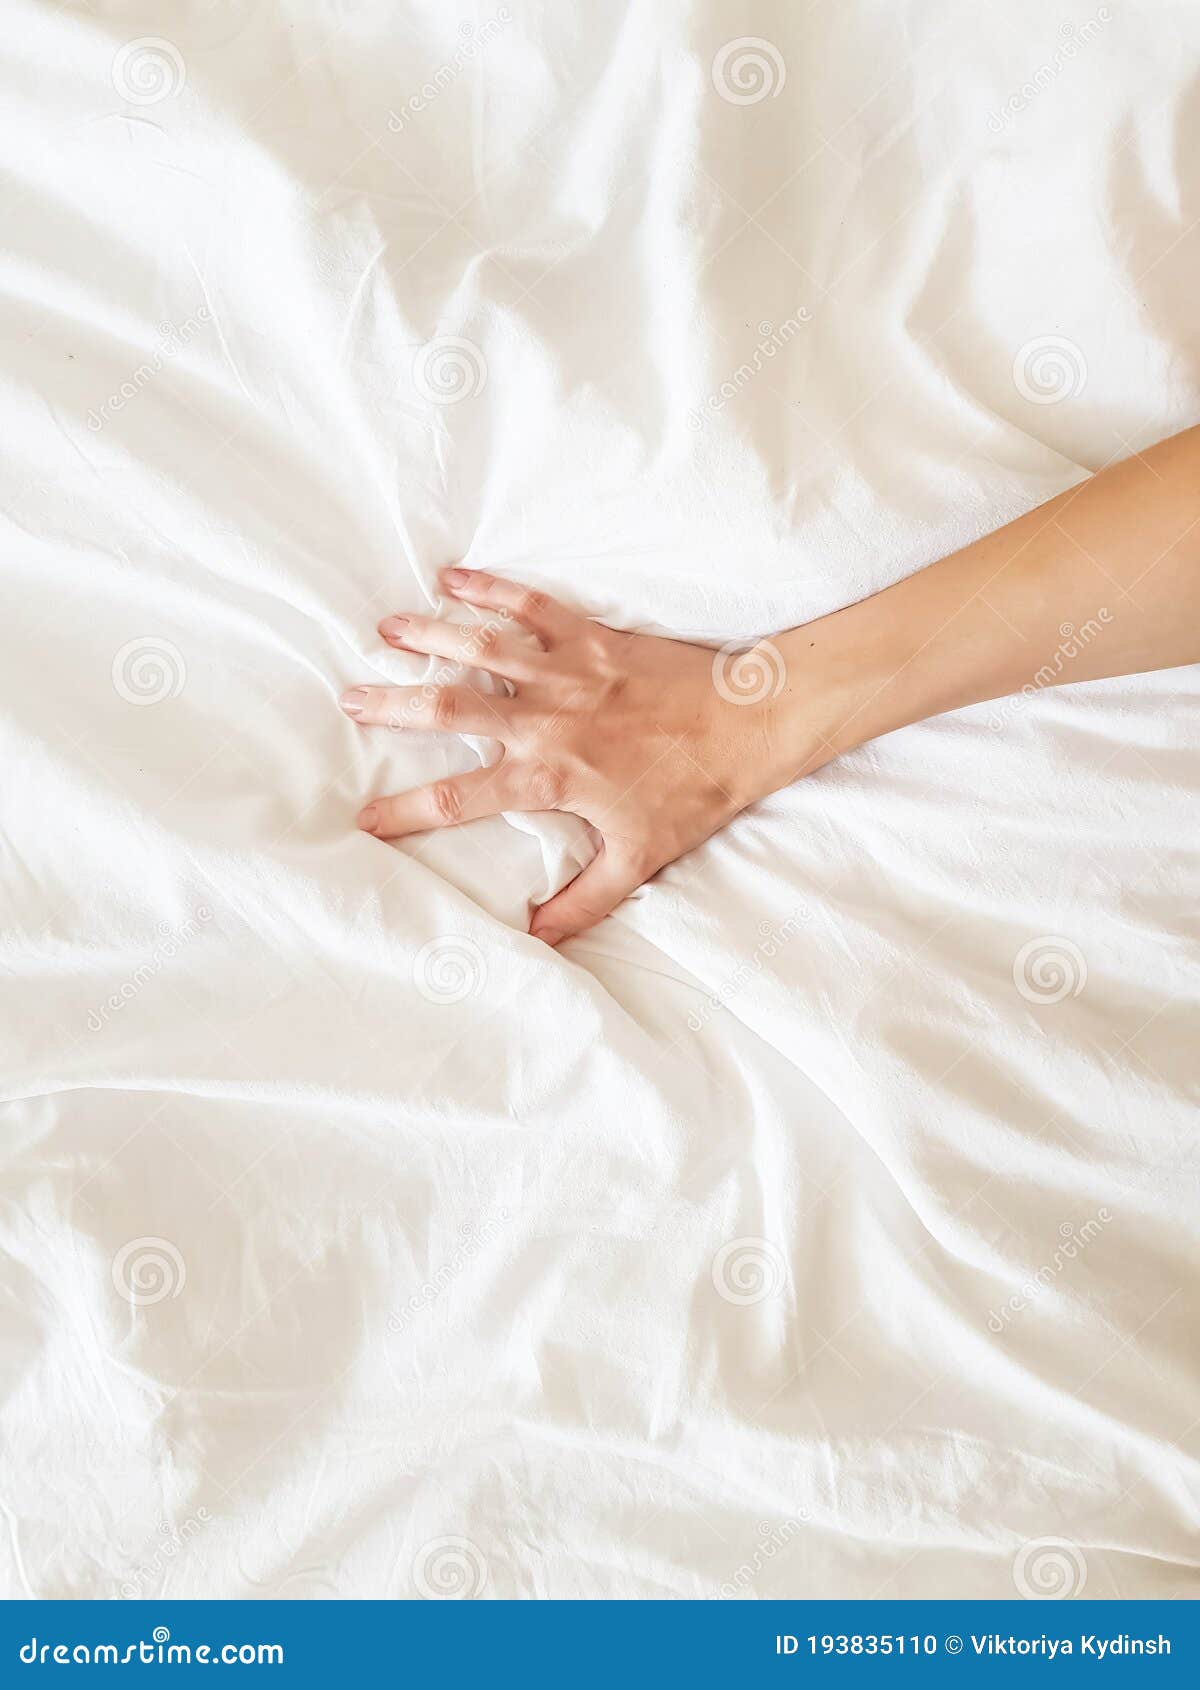 Close Up Woman Hand Pulling and Squeezing White Sheets in Ecstasy in image